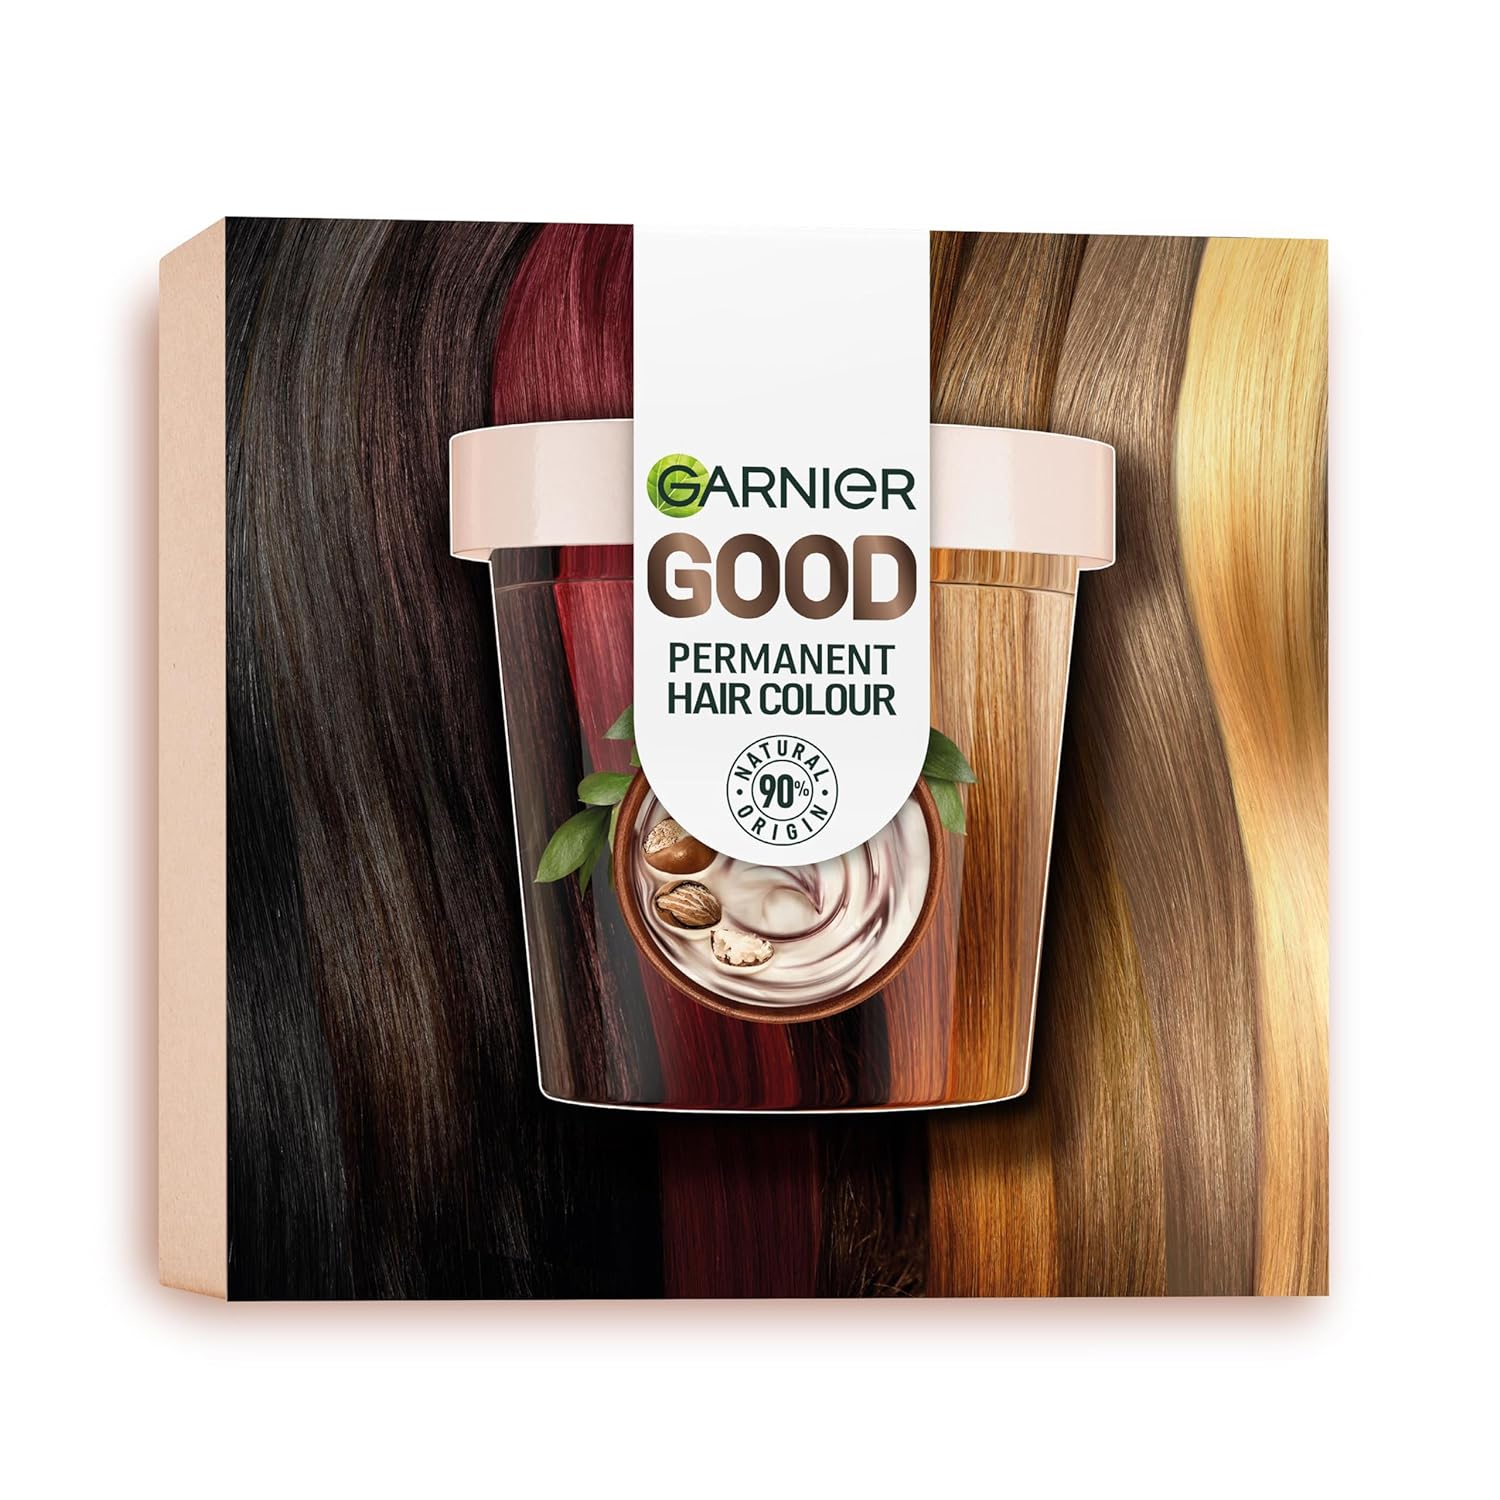 Garnier Permanent Hair Colour, Hard Dye Set for Intense and Long-Lasting Hair Colour, Colouration for up to 8 Weeks of Radiant Colour, No Ammonia, 7.12 Latte Macchiato Brown, Good Refill Kit